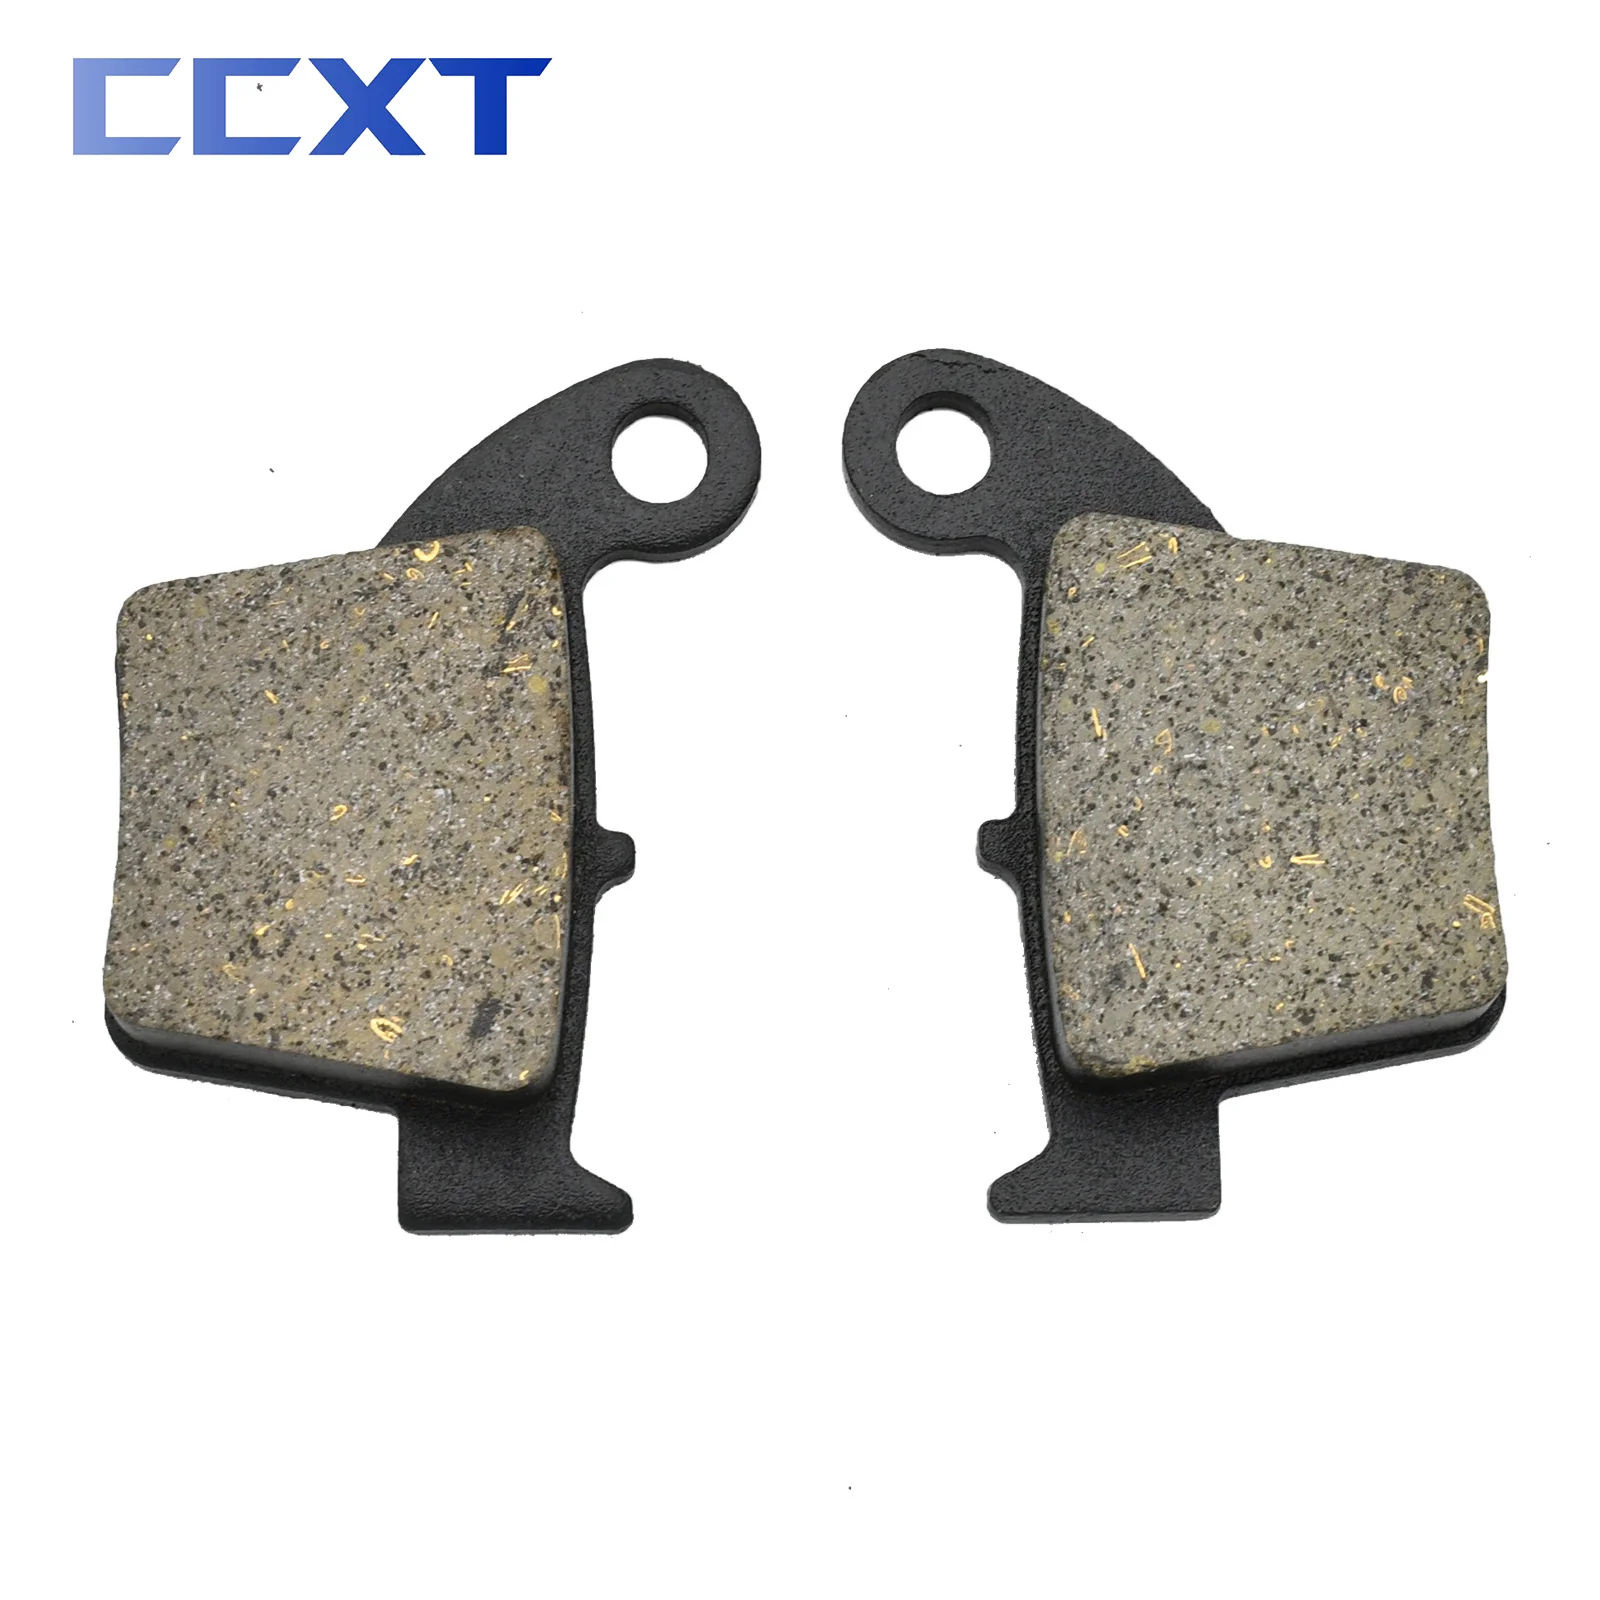 

Motorcycle Front & Rear Brake Pads For Honda CR CRF XR CRE CRM CREF CRMF 50 125 150 230 250 250R 250F 290 300 400 450 490 500